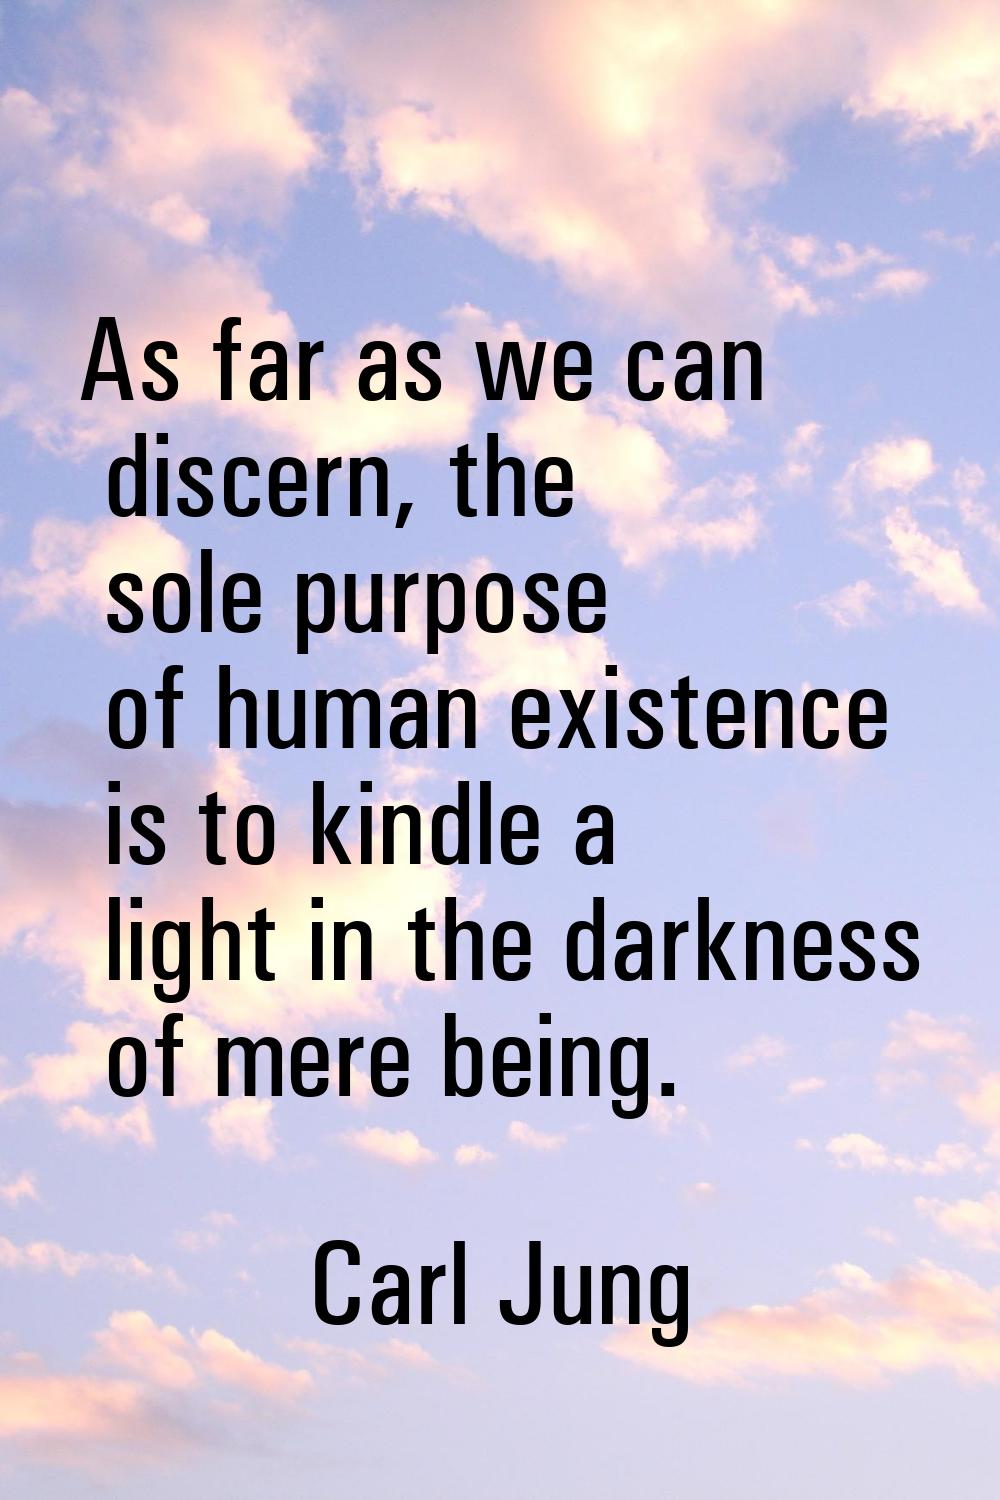 As far as we can discern, the sole purpose of human existence is to kindle a light in the darkness 